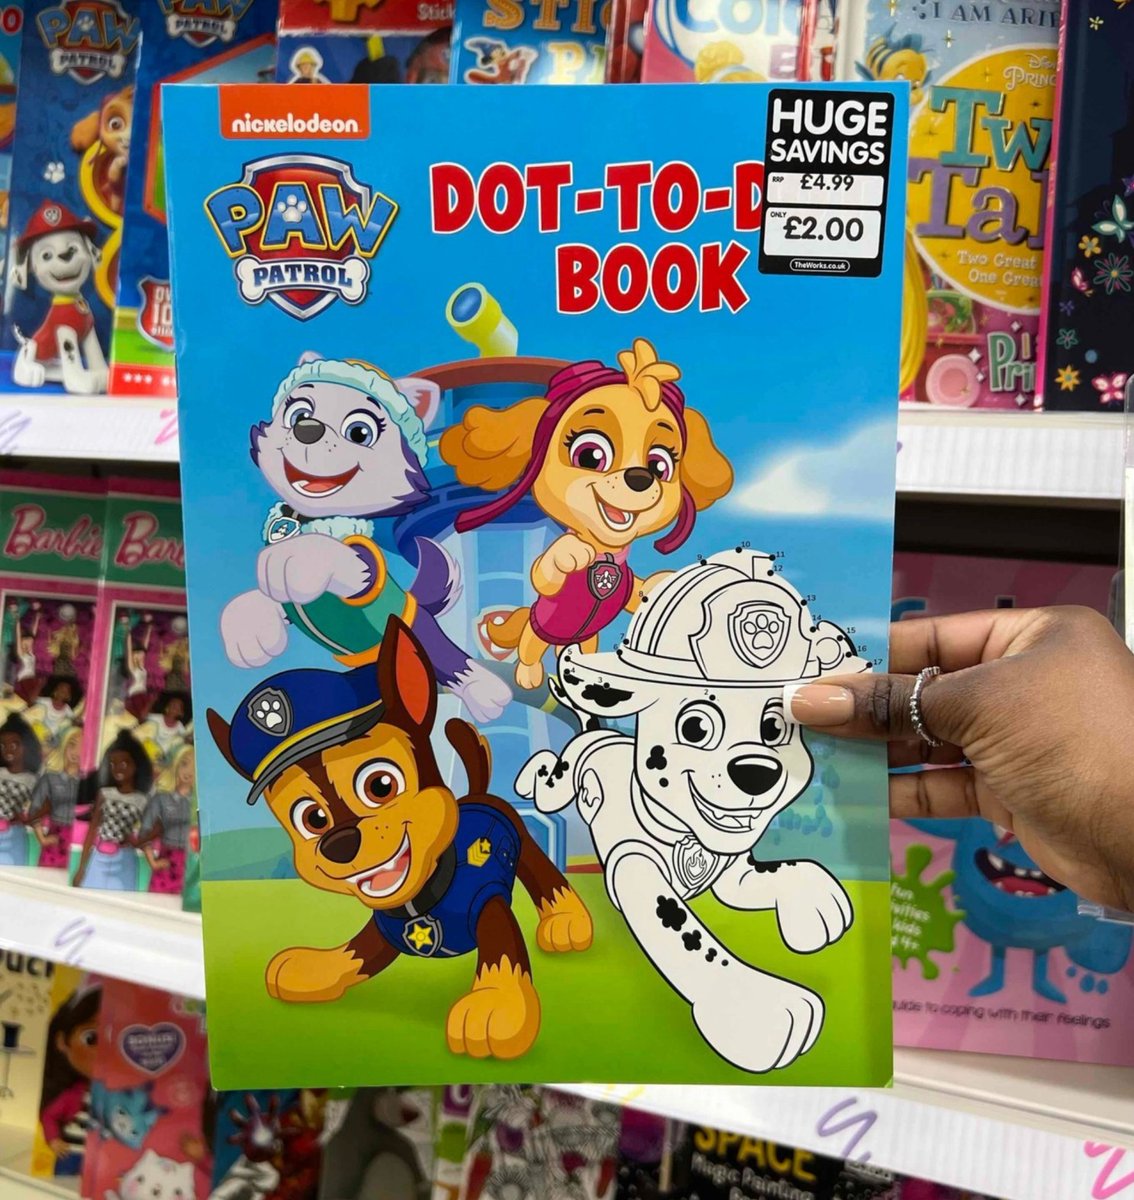 PAW Patrol is on a roll at @theworksstores! 🐾

Are your little ones obsessed with Chase and the gang? 🐶 Get your paws on some pawsome activities to keep them entertained!

#TheWorks #PawPatrol #PawPatrolMovie #MightyMovie